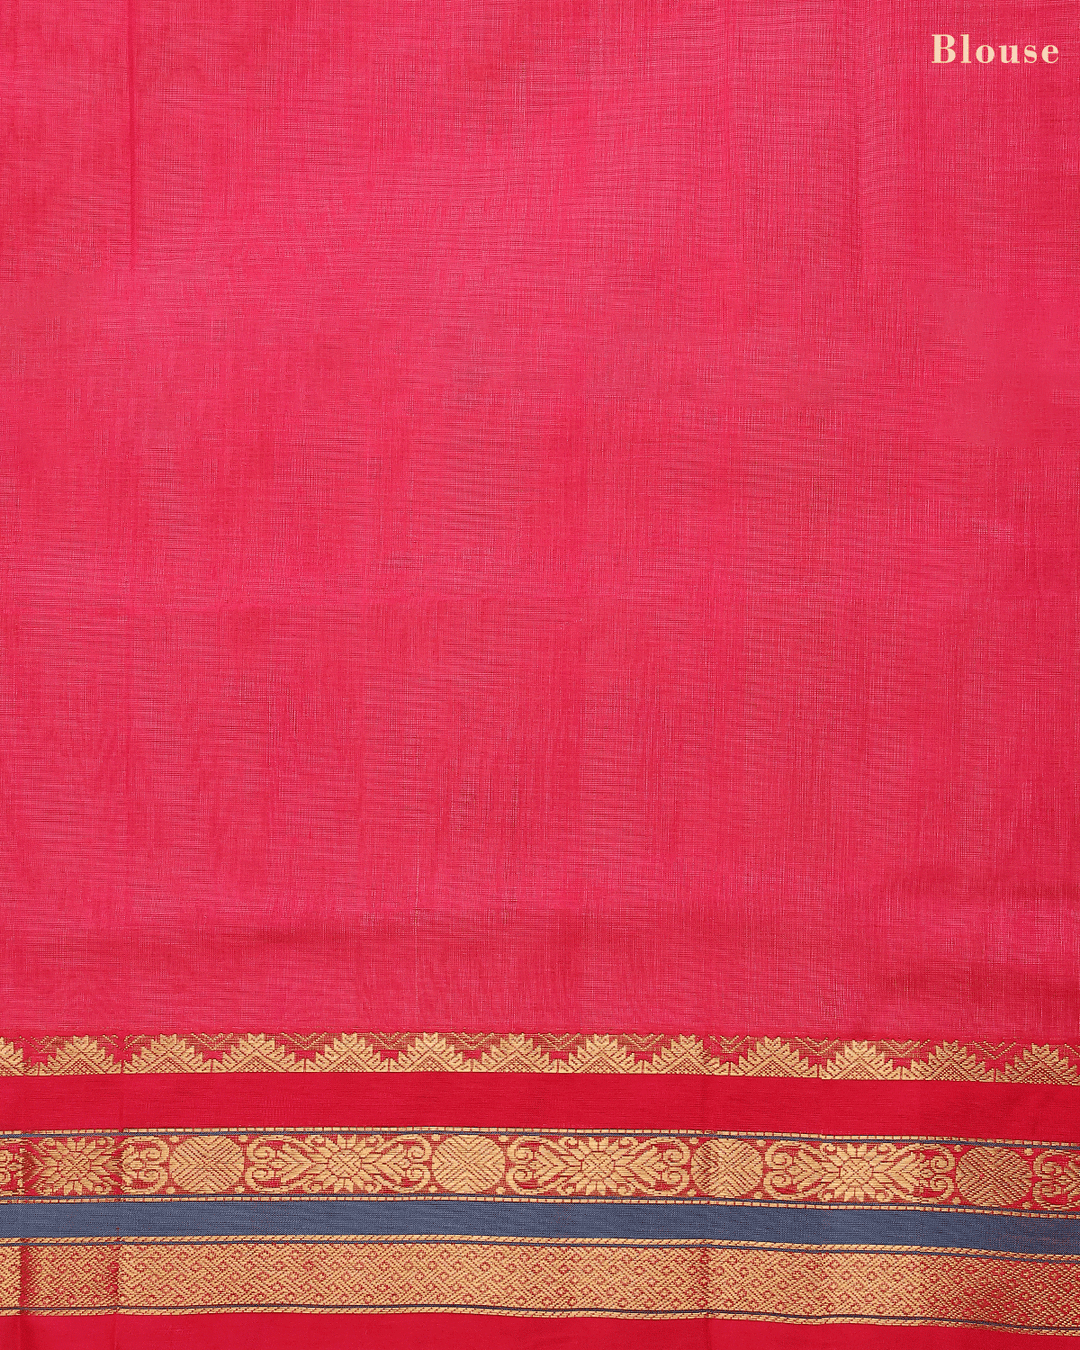 Peach Pink and Red Silk Cotton Saree - D8238 - View 3